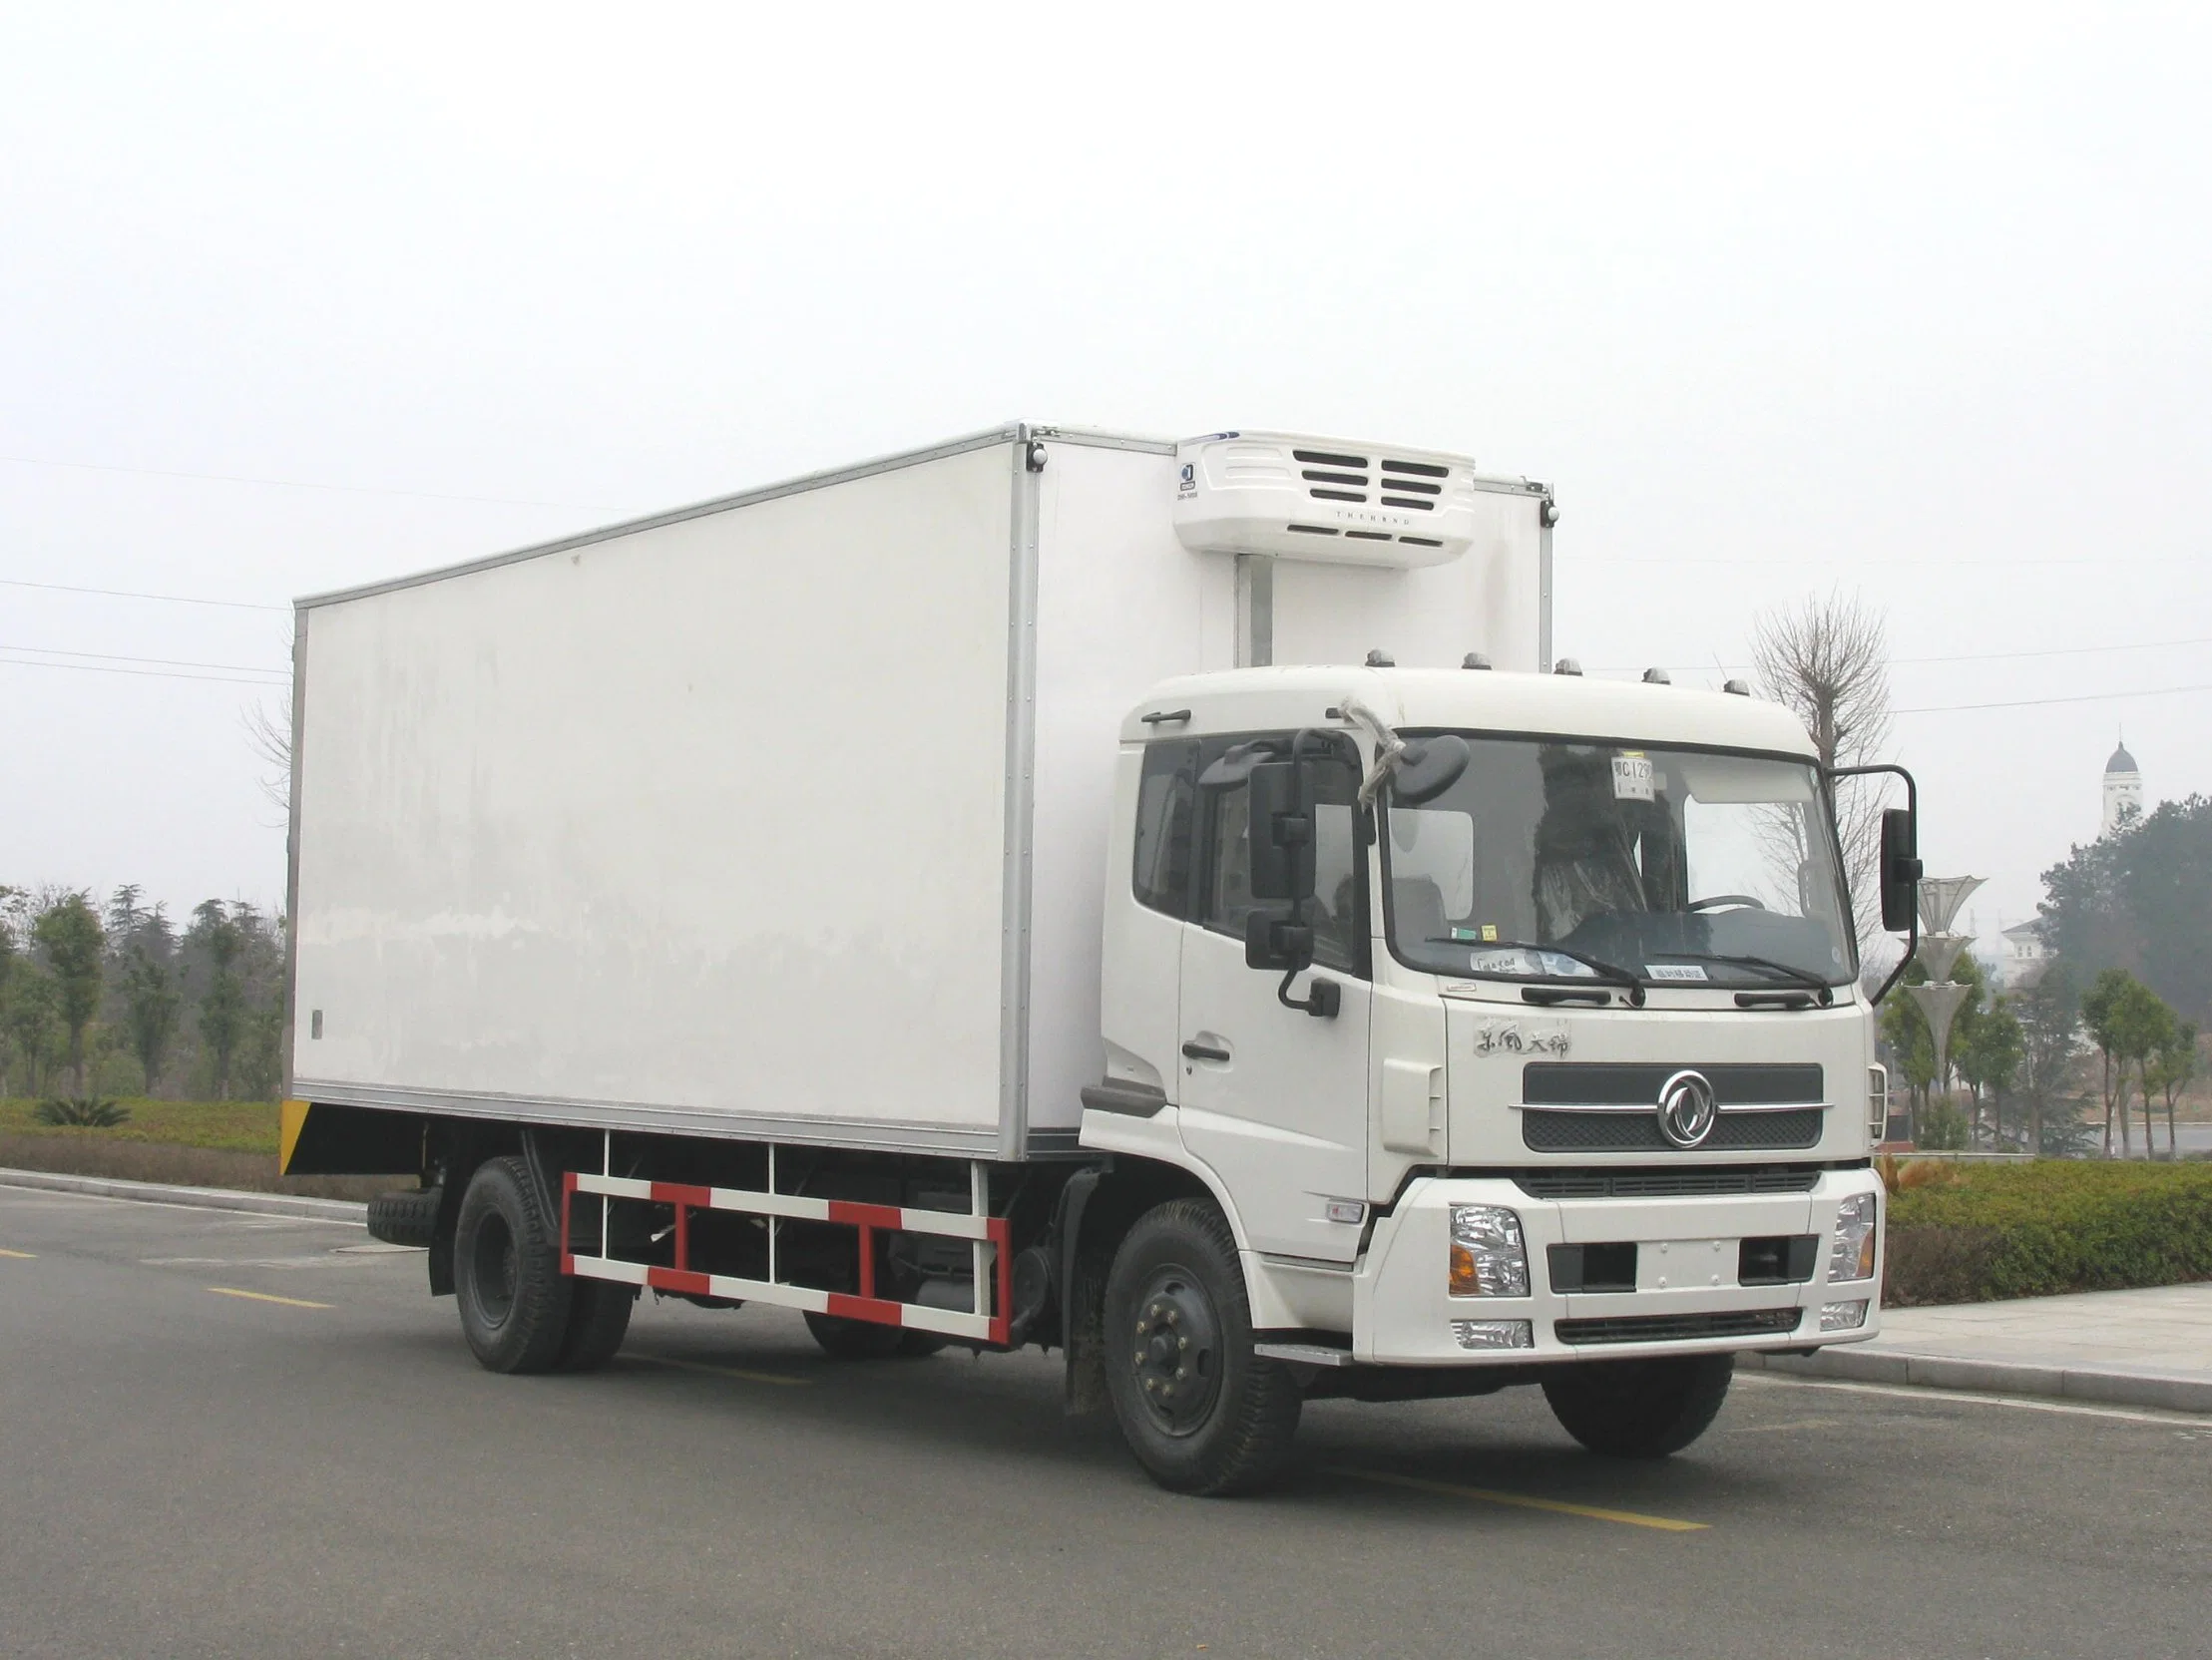 Superior FRP Sandwich Panel for Refrigerated Truck Body